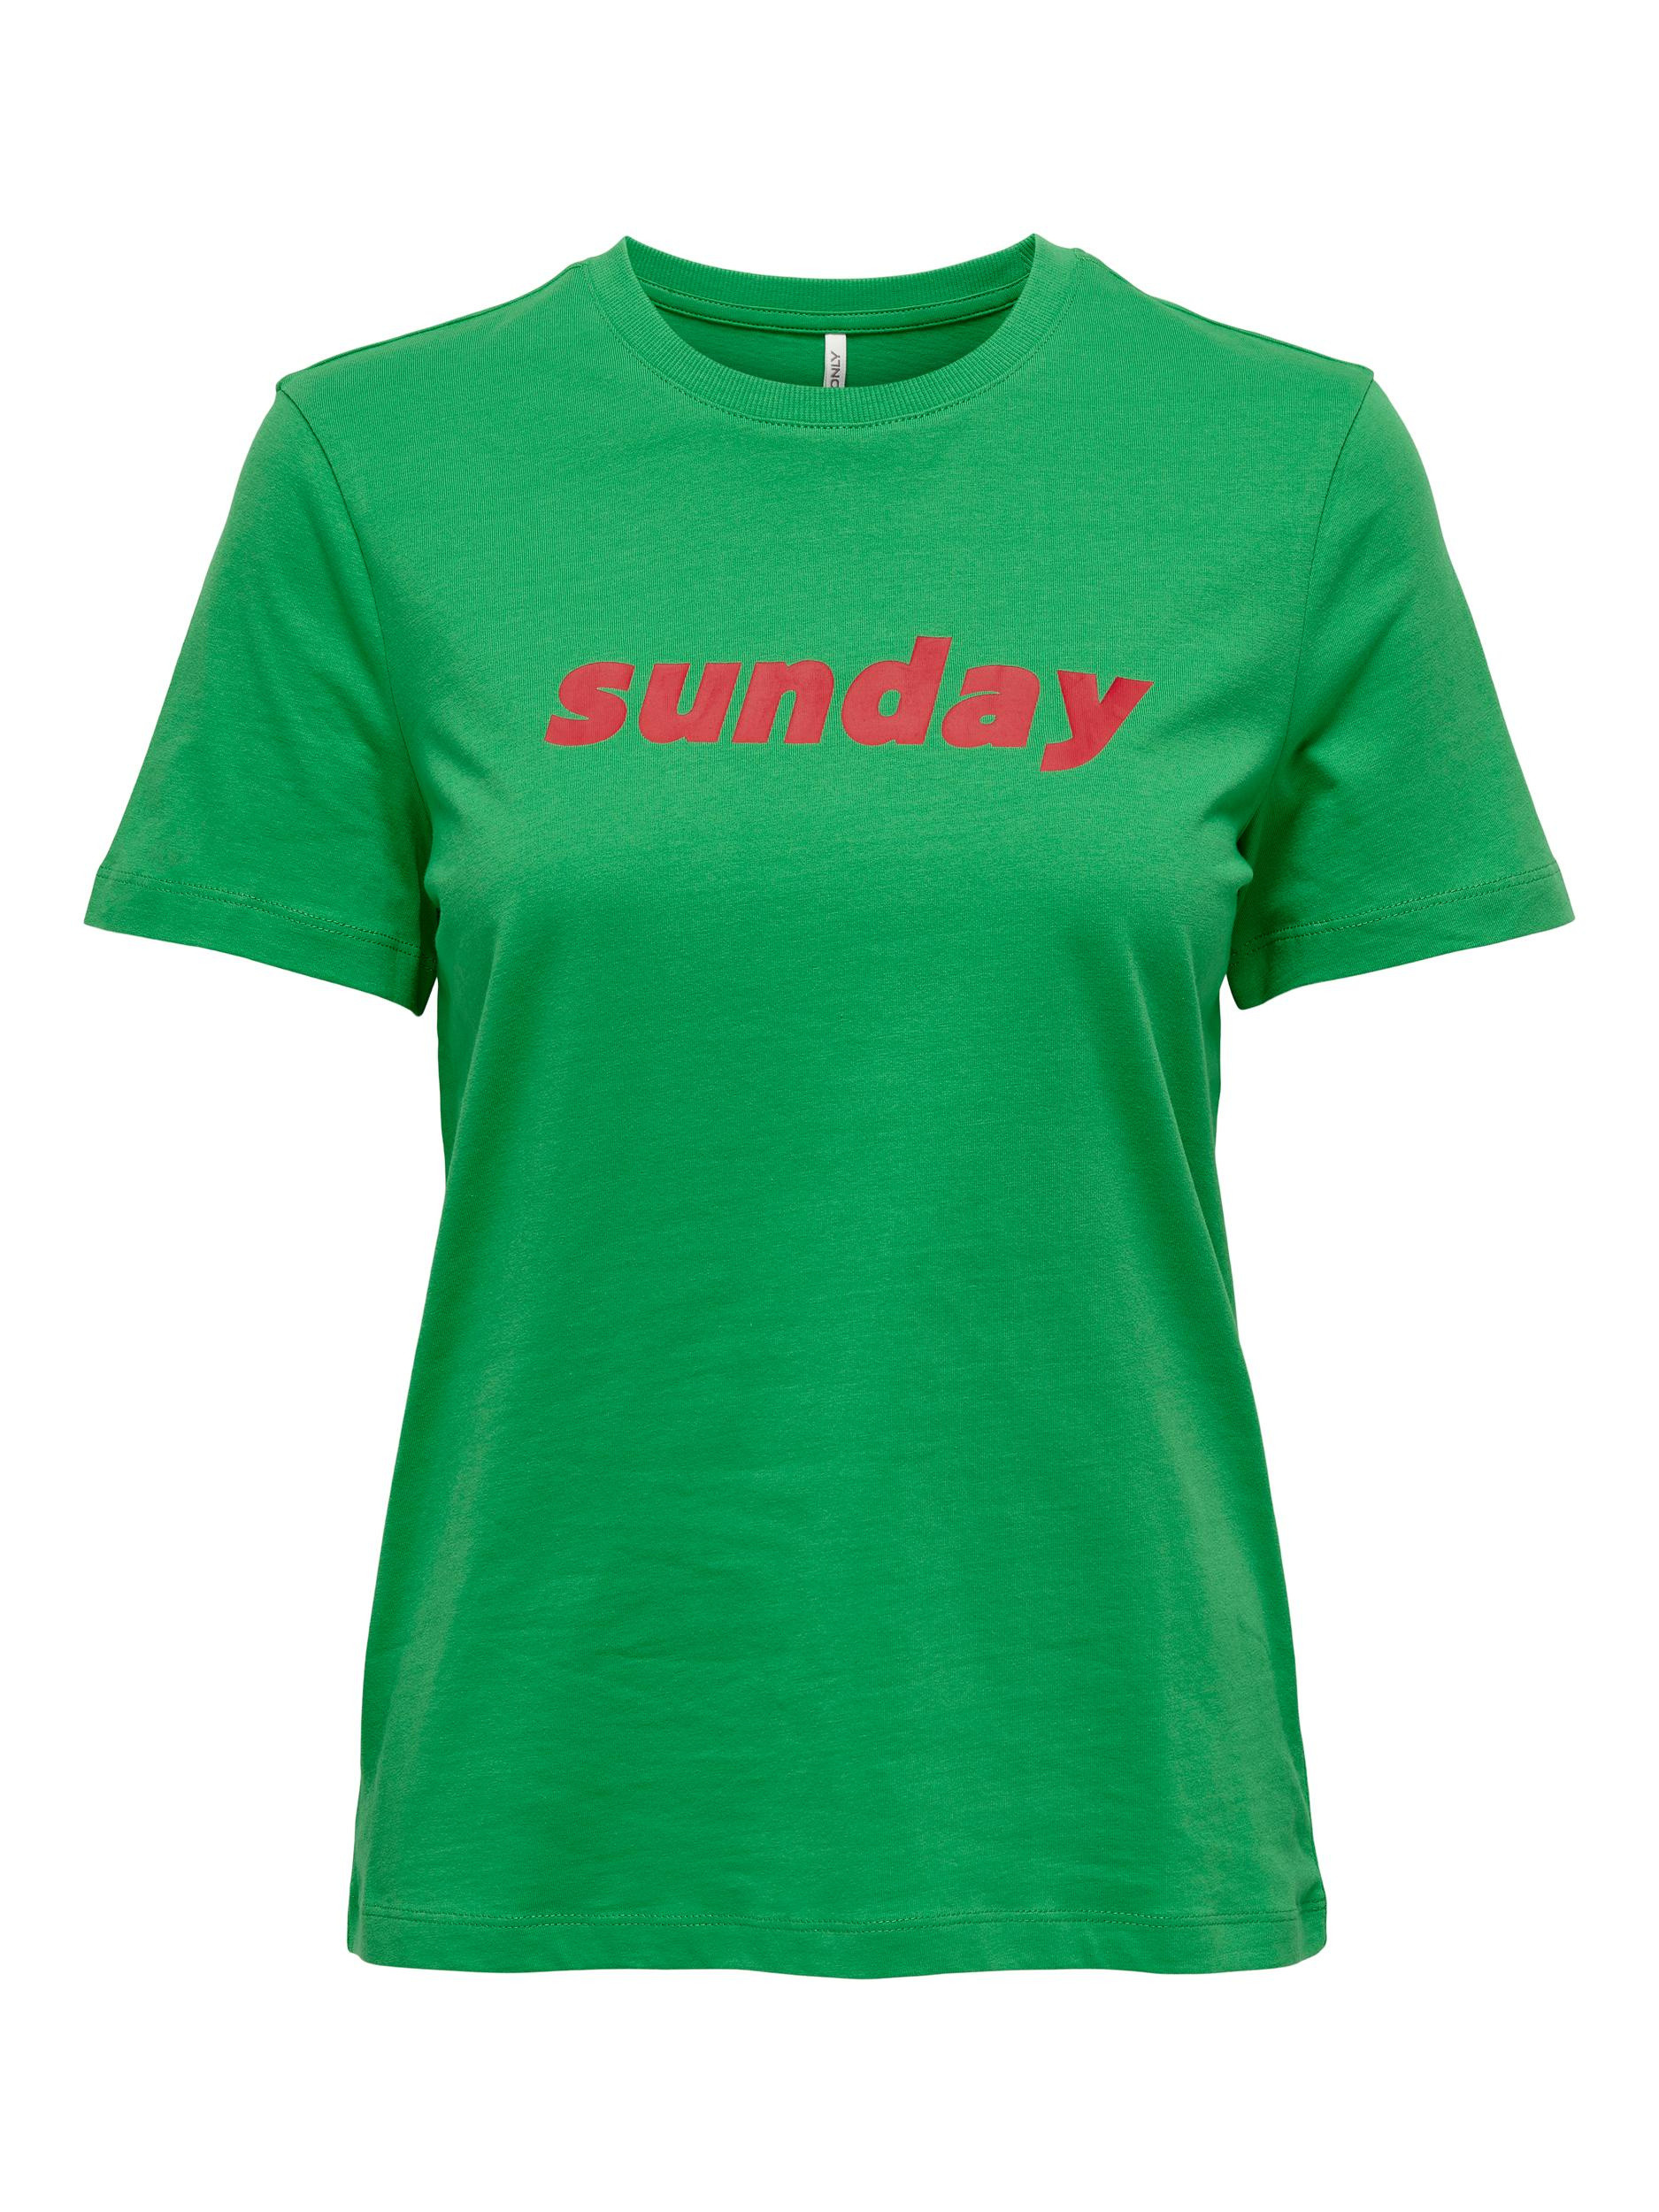 Only - Regular fit T-shirt with print, Green, large image number 0